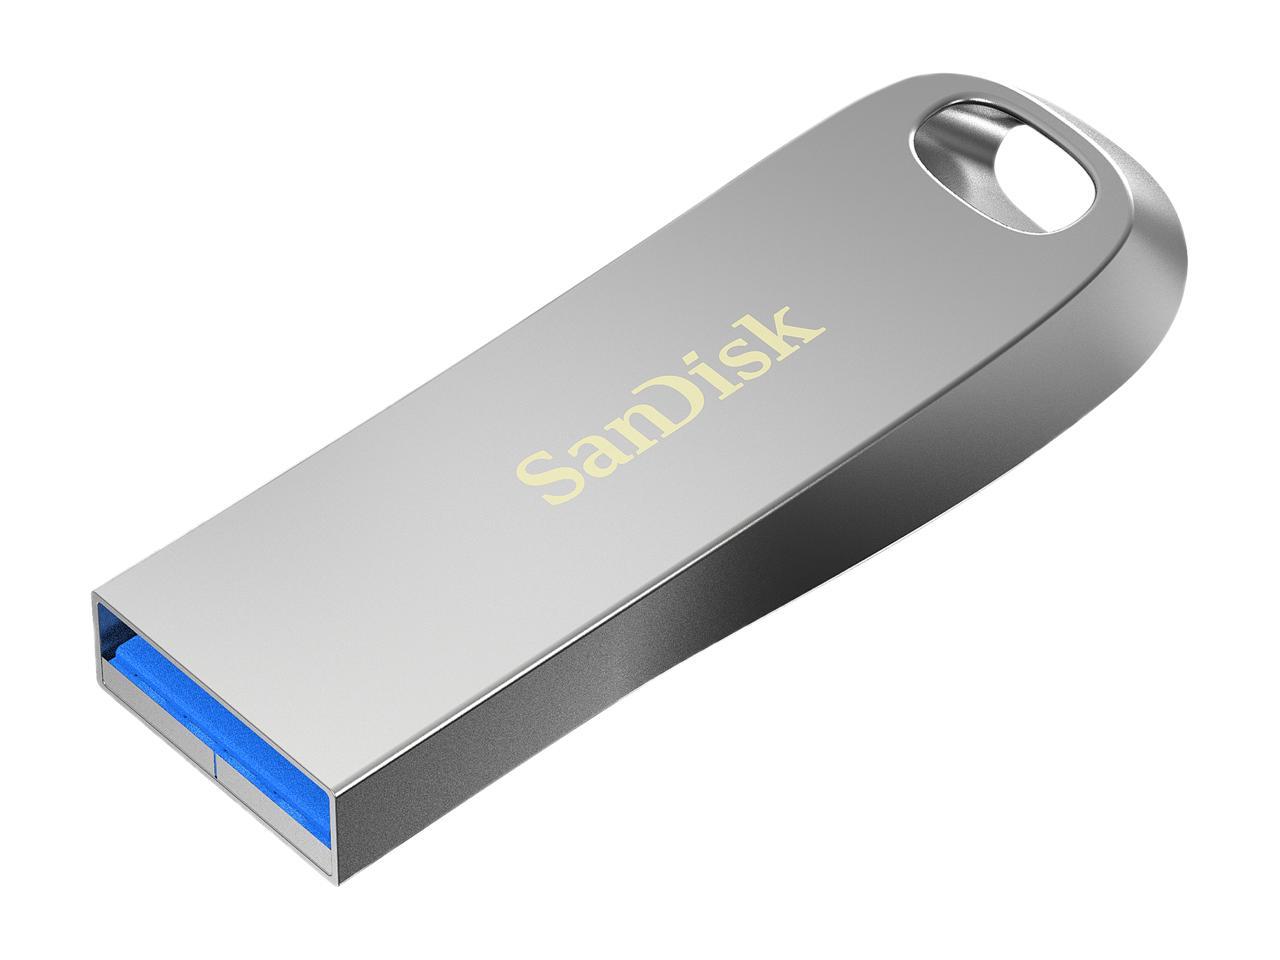 SanDisk 64GB Ultra Luxe USB 3.1 Flash Drive, Speed Up to 150MB/s (SDCZ74-064G-G46) - image 3 of 5